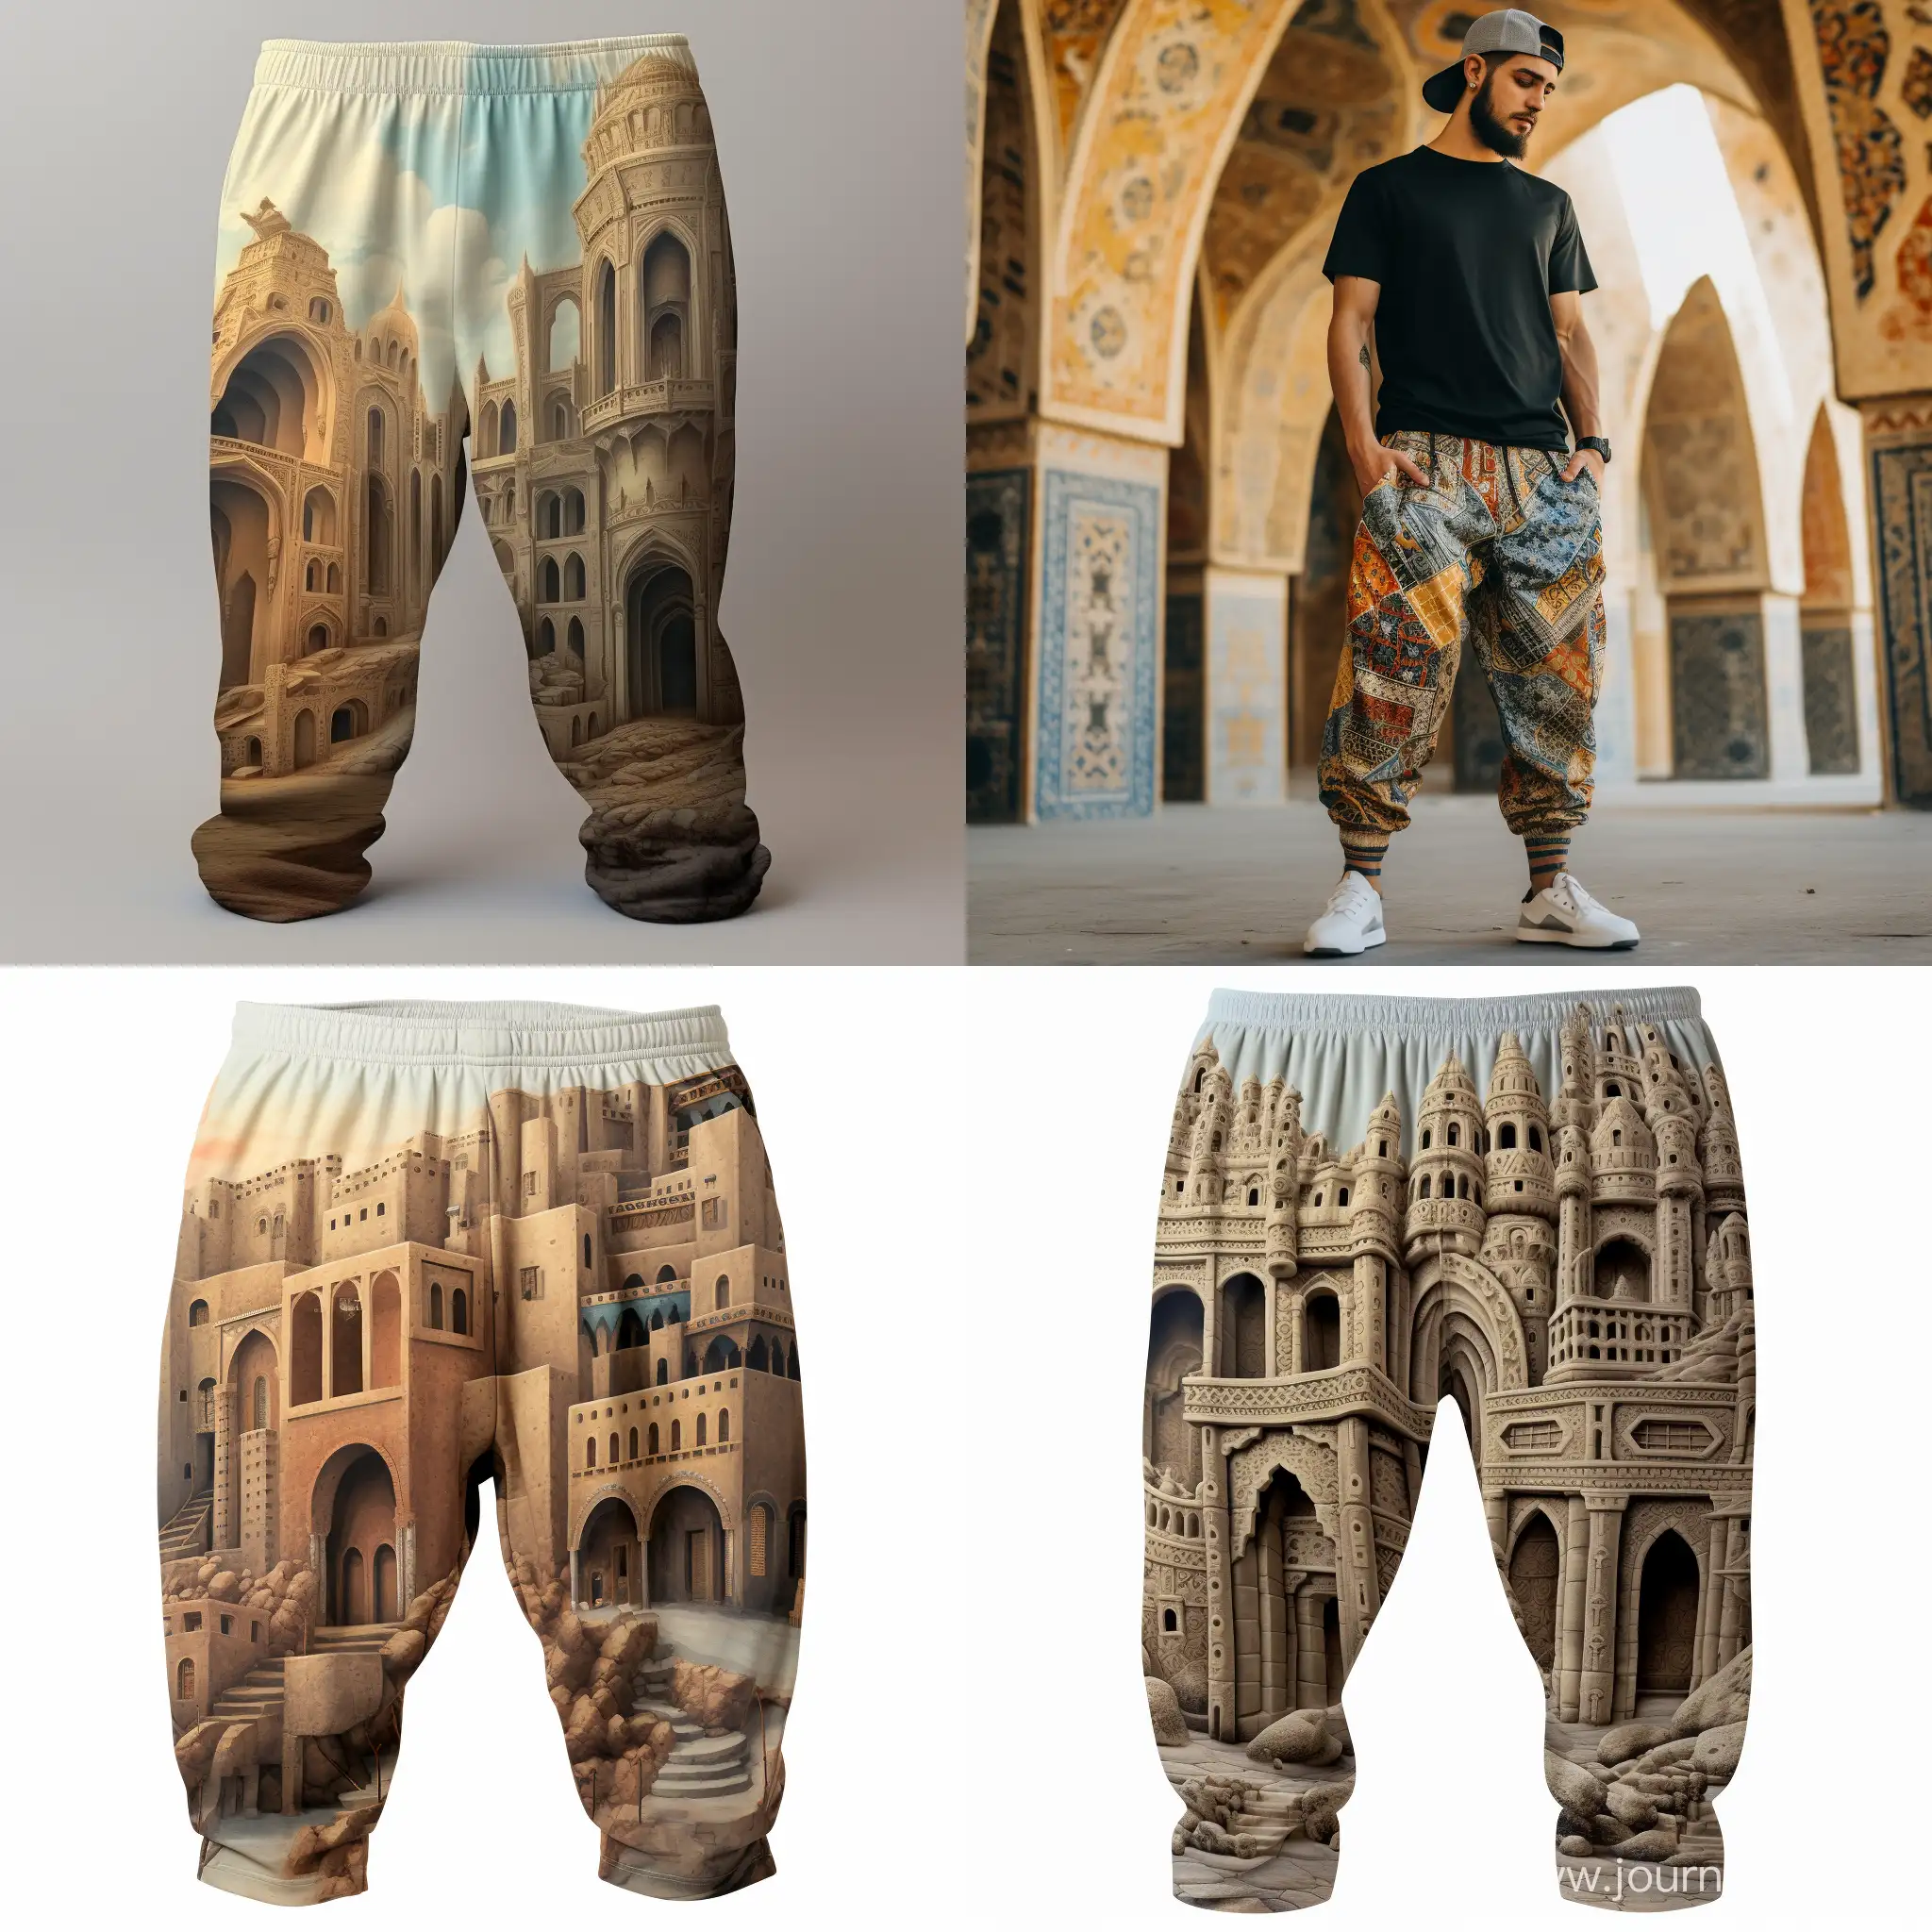 Stylish-Baggy-Pants-with-Ancient-Iranian-Building-Designs